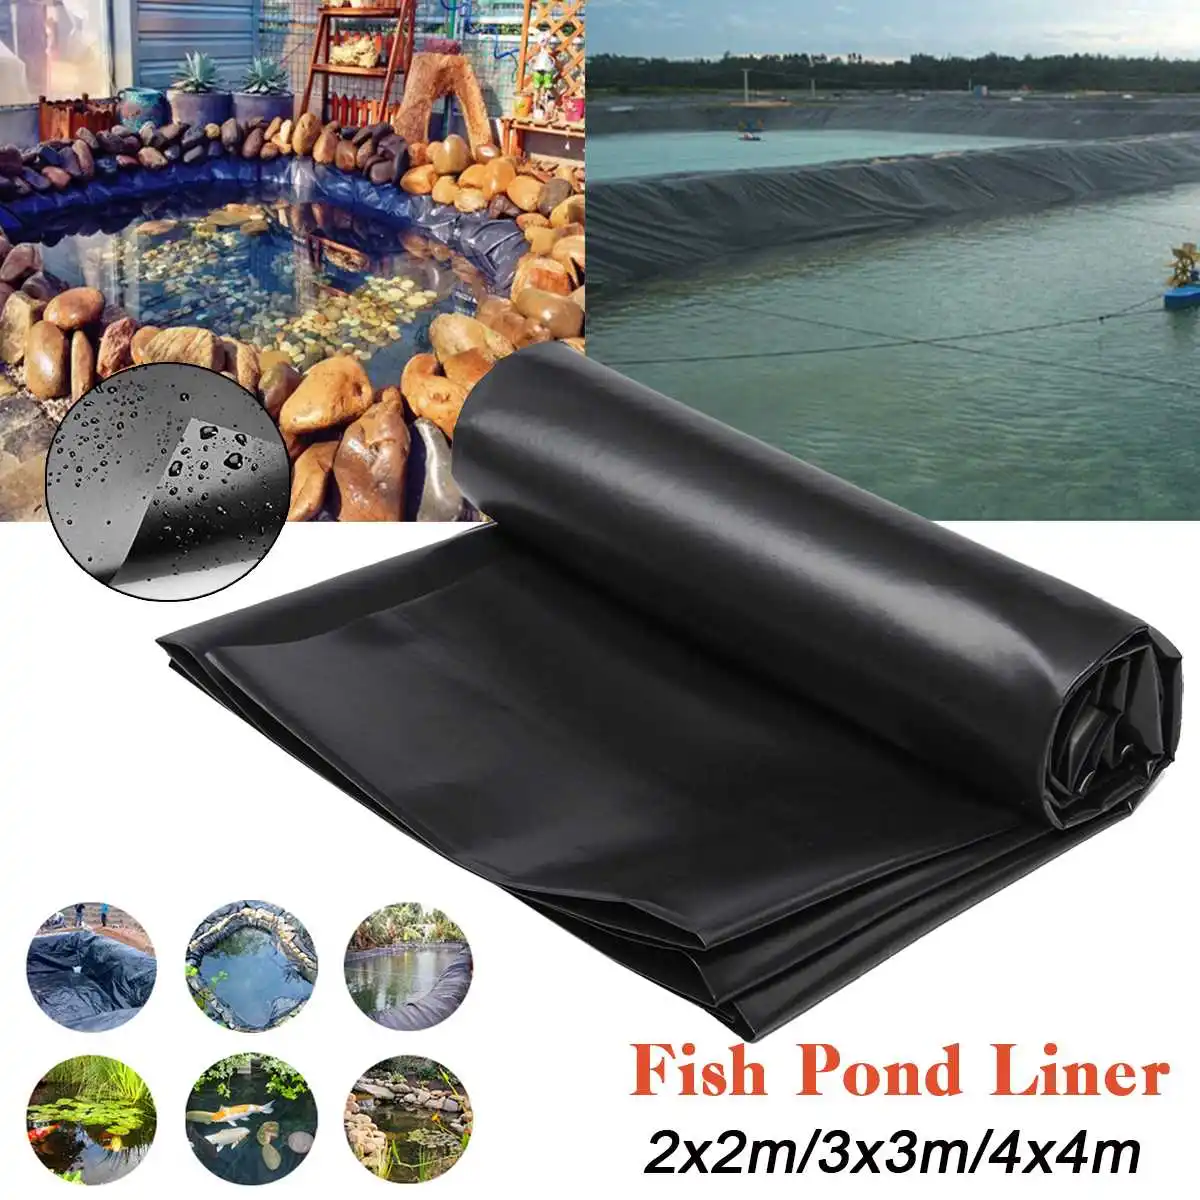 4 Size Black Fish Pond Liners Home Garden Pool Reinforced HDPE Heavy Duty Landscaping Pool Pond Waterproof Liner Cloth Thickness